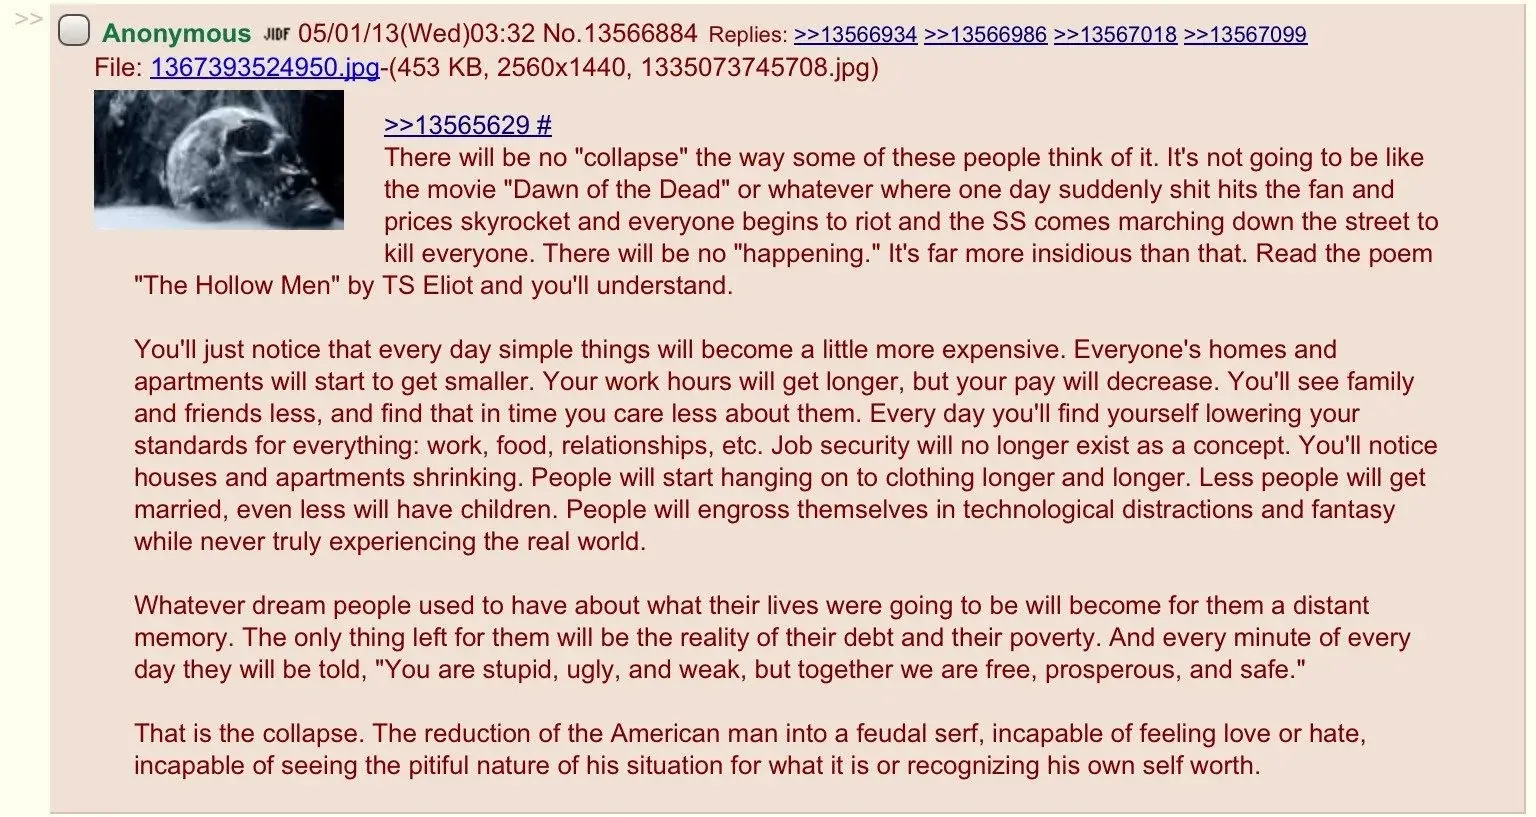 Relevant 4chan post